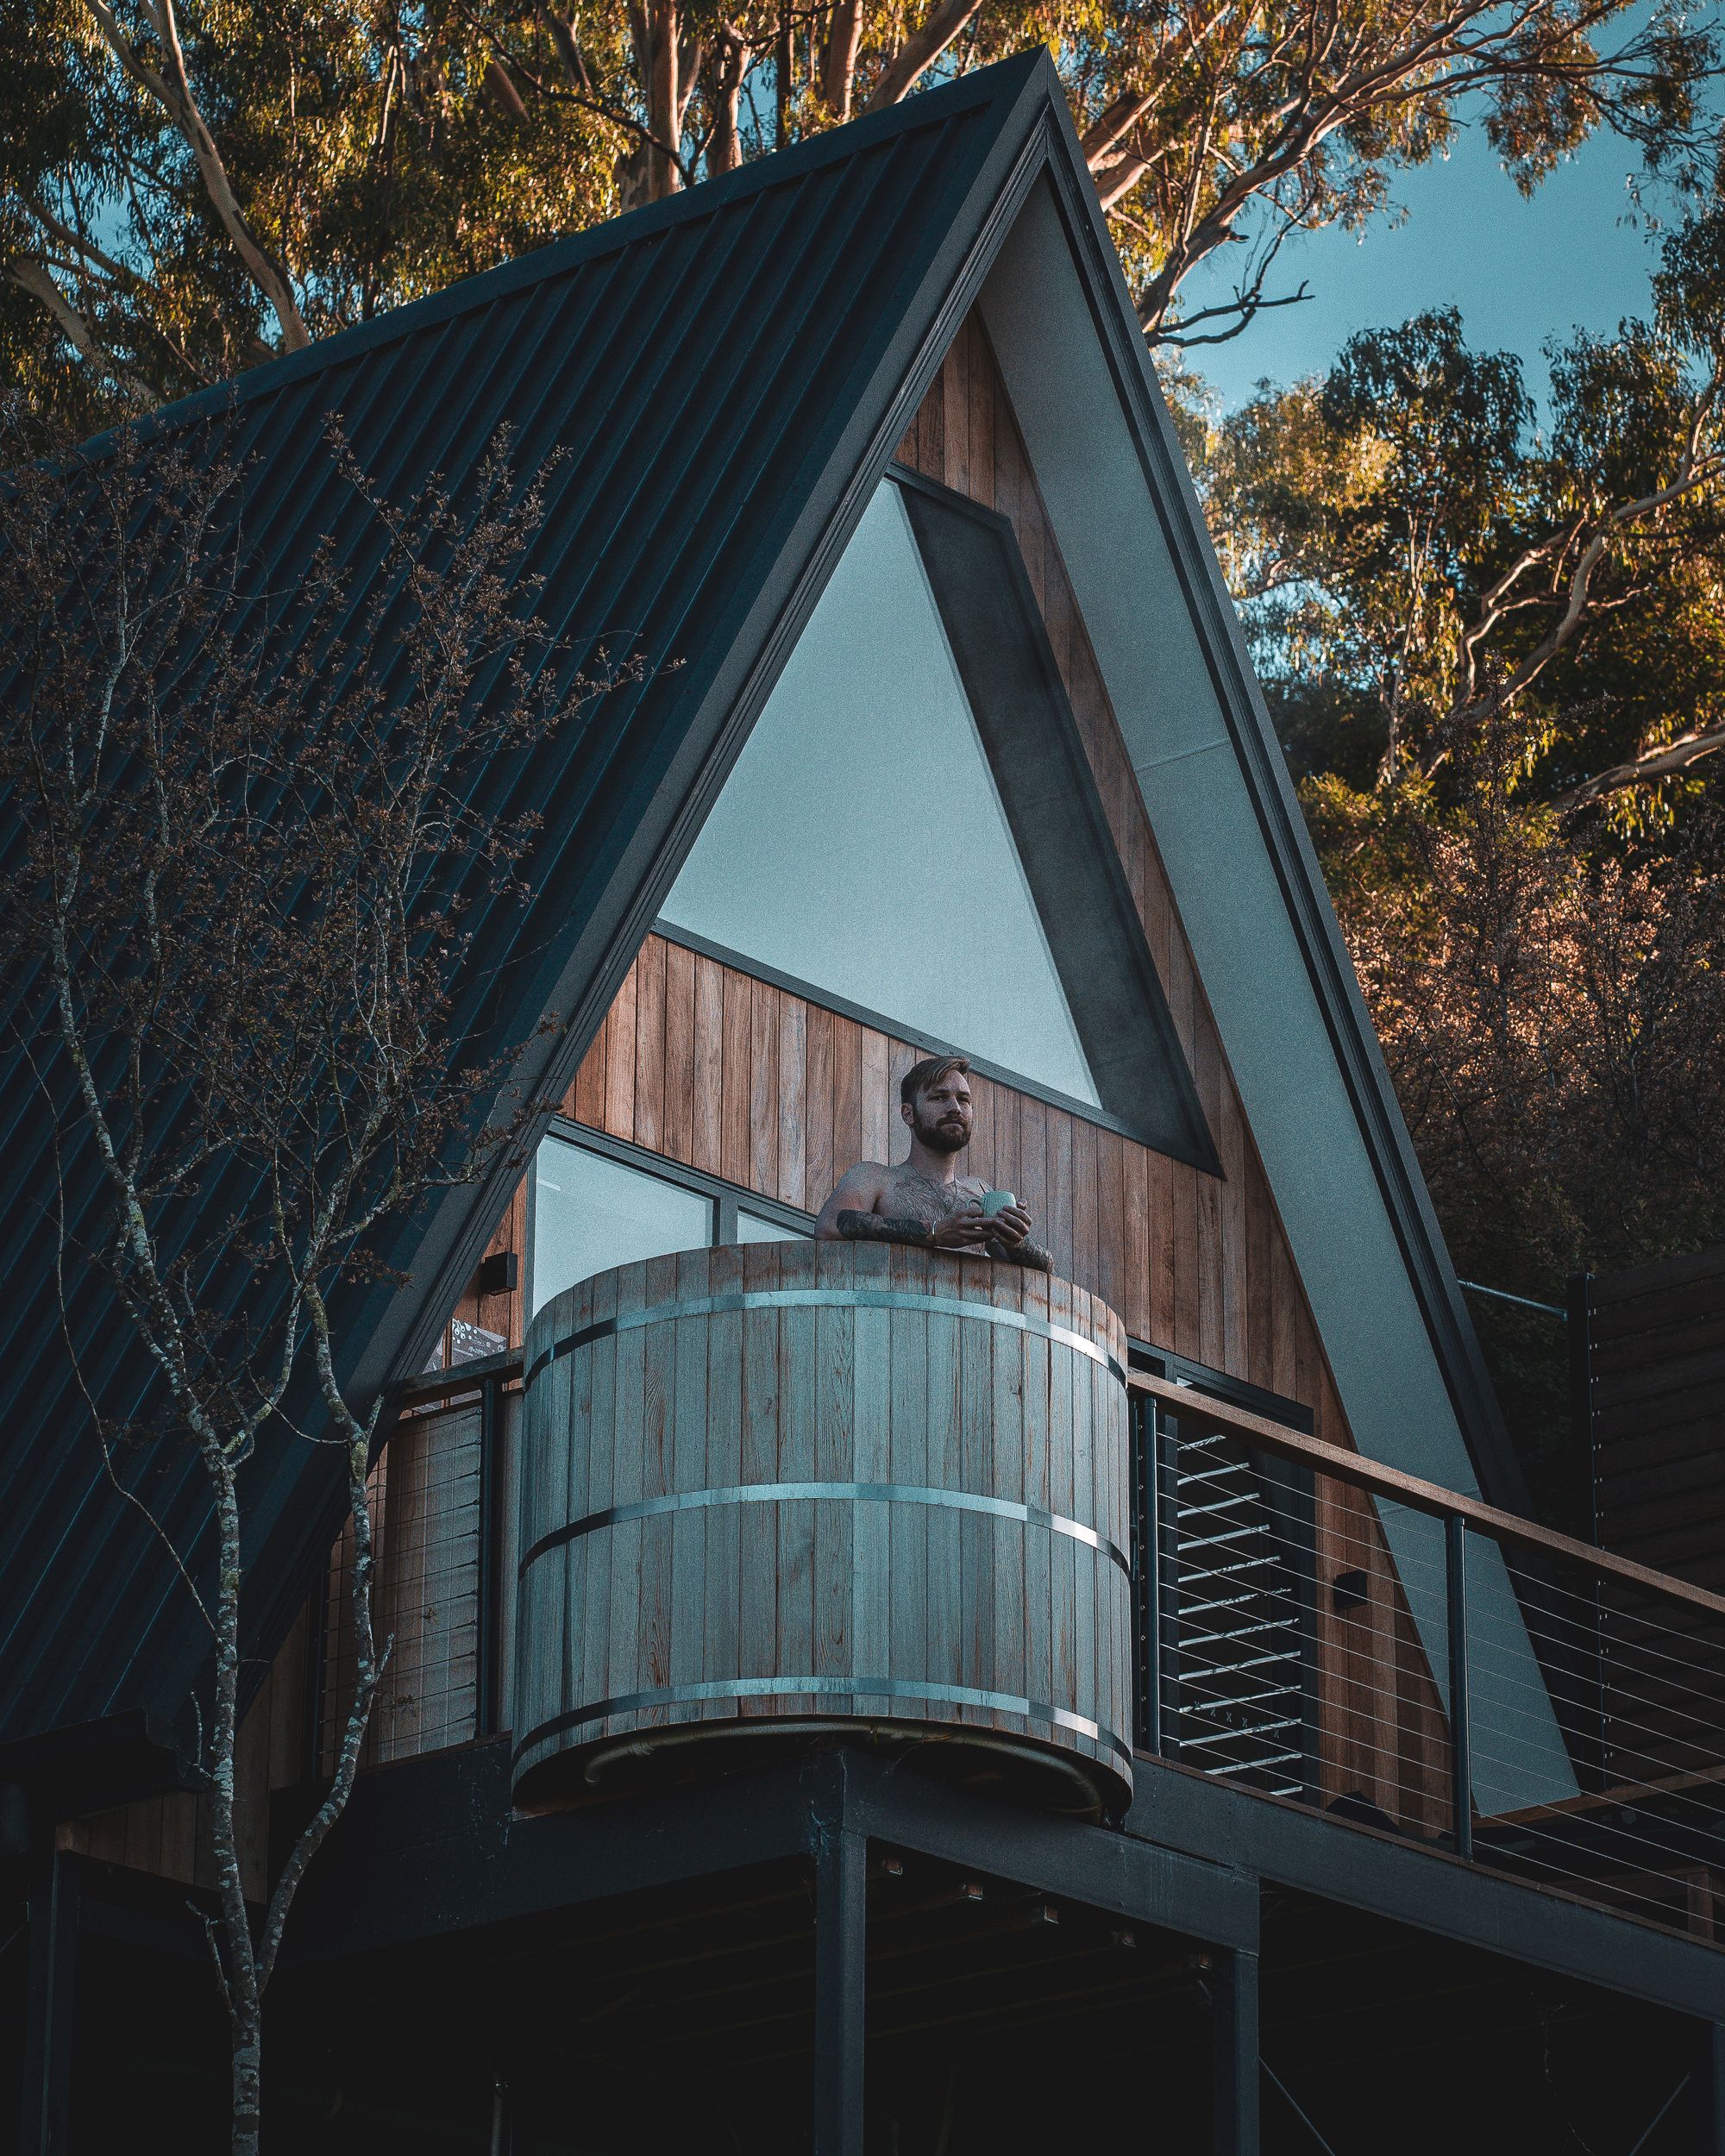 The Eco Cabin Tasmania by Wild Life Environmental. Detailed view of cabin and guest enjoying hot tub